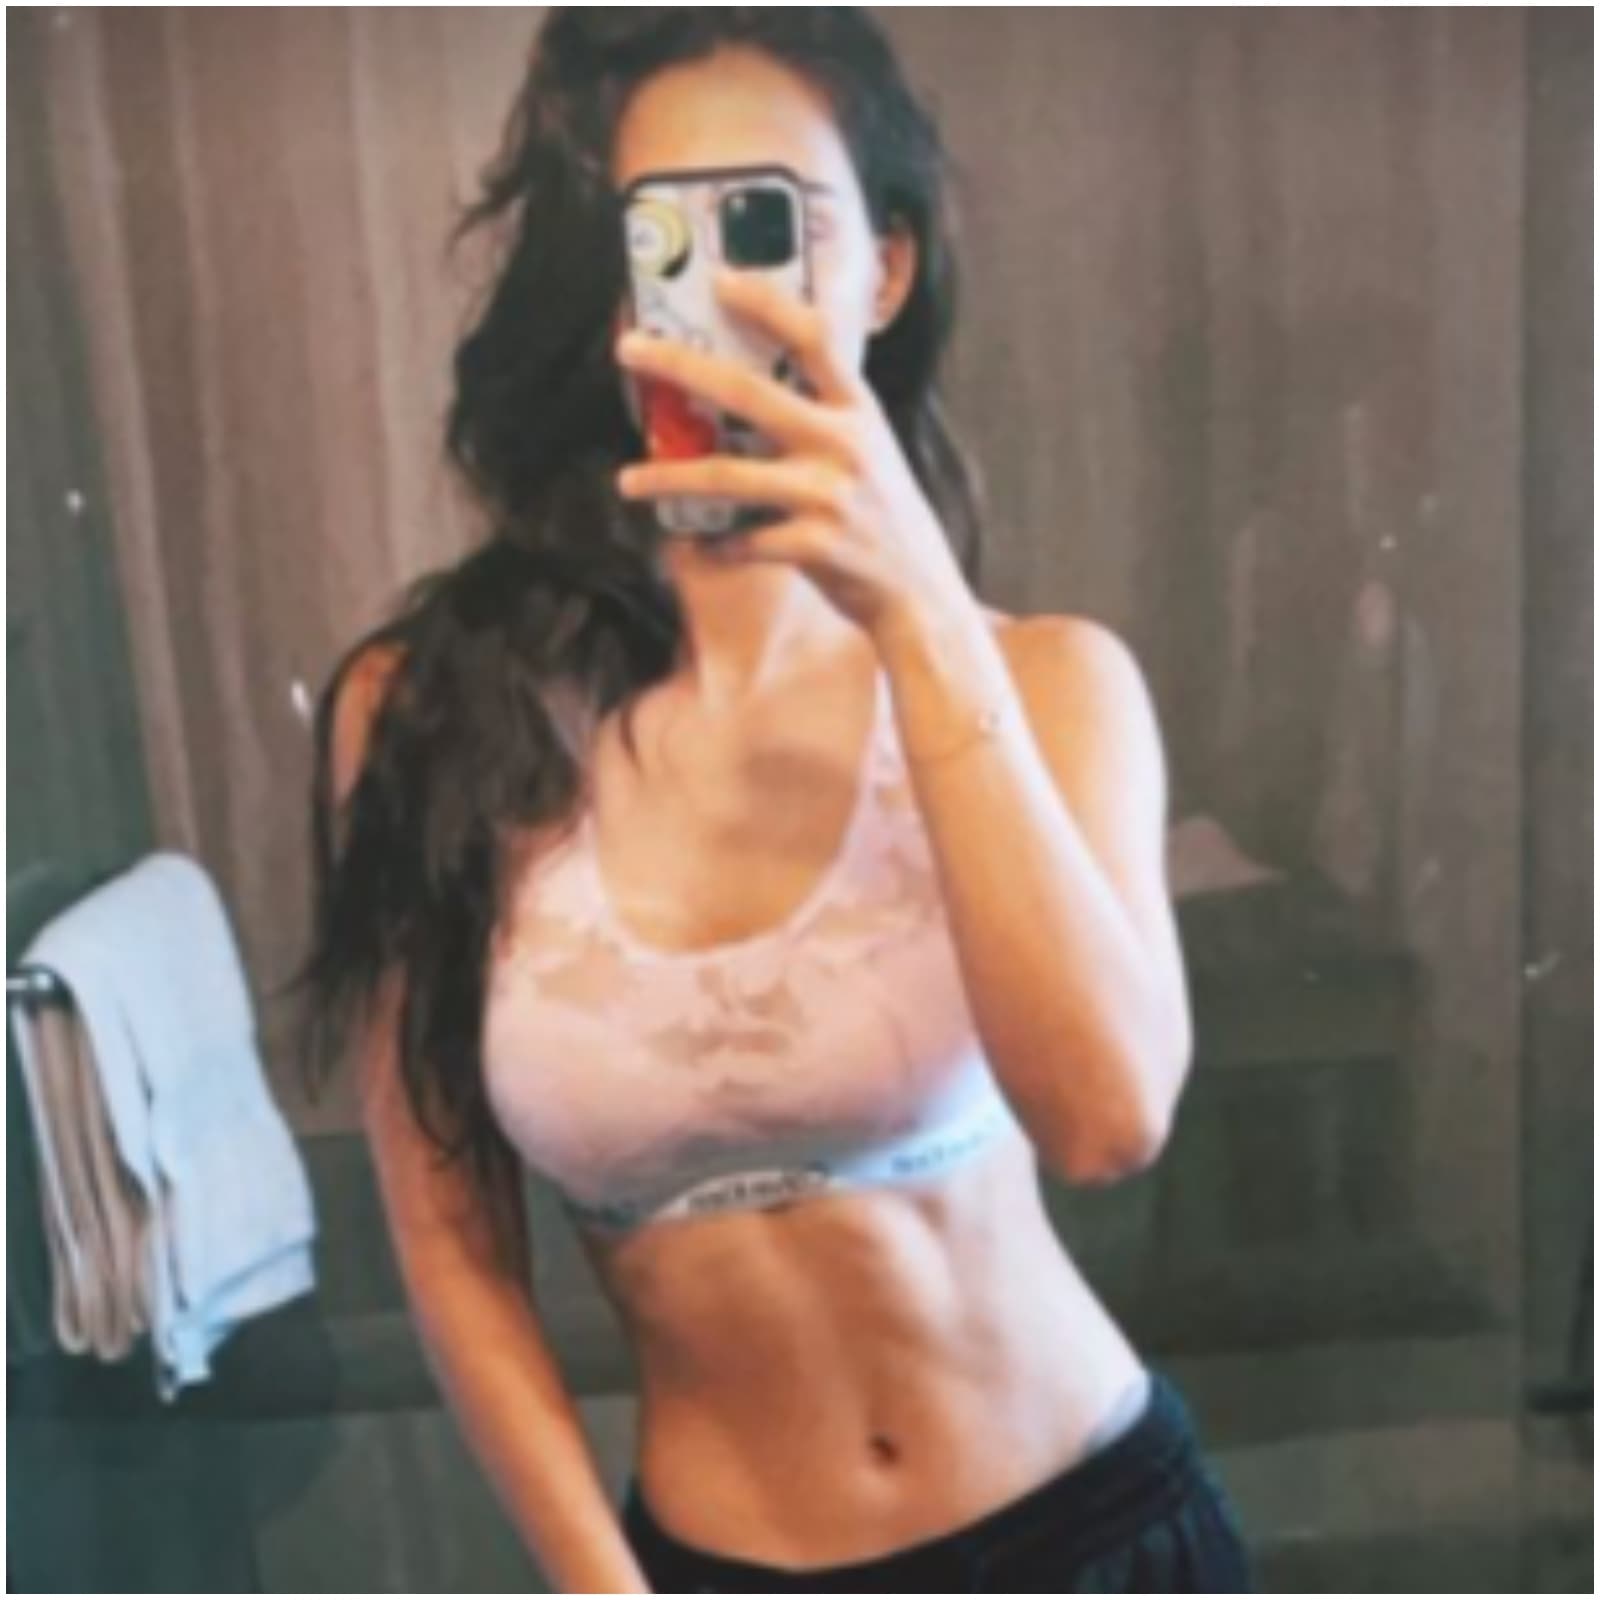 Disha Patani In A Chic Sports Bra Is So Fabulous, Even Her Mirror Knows It